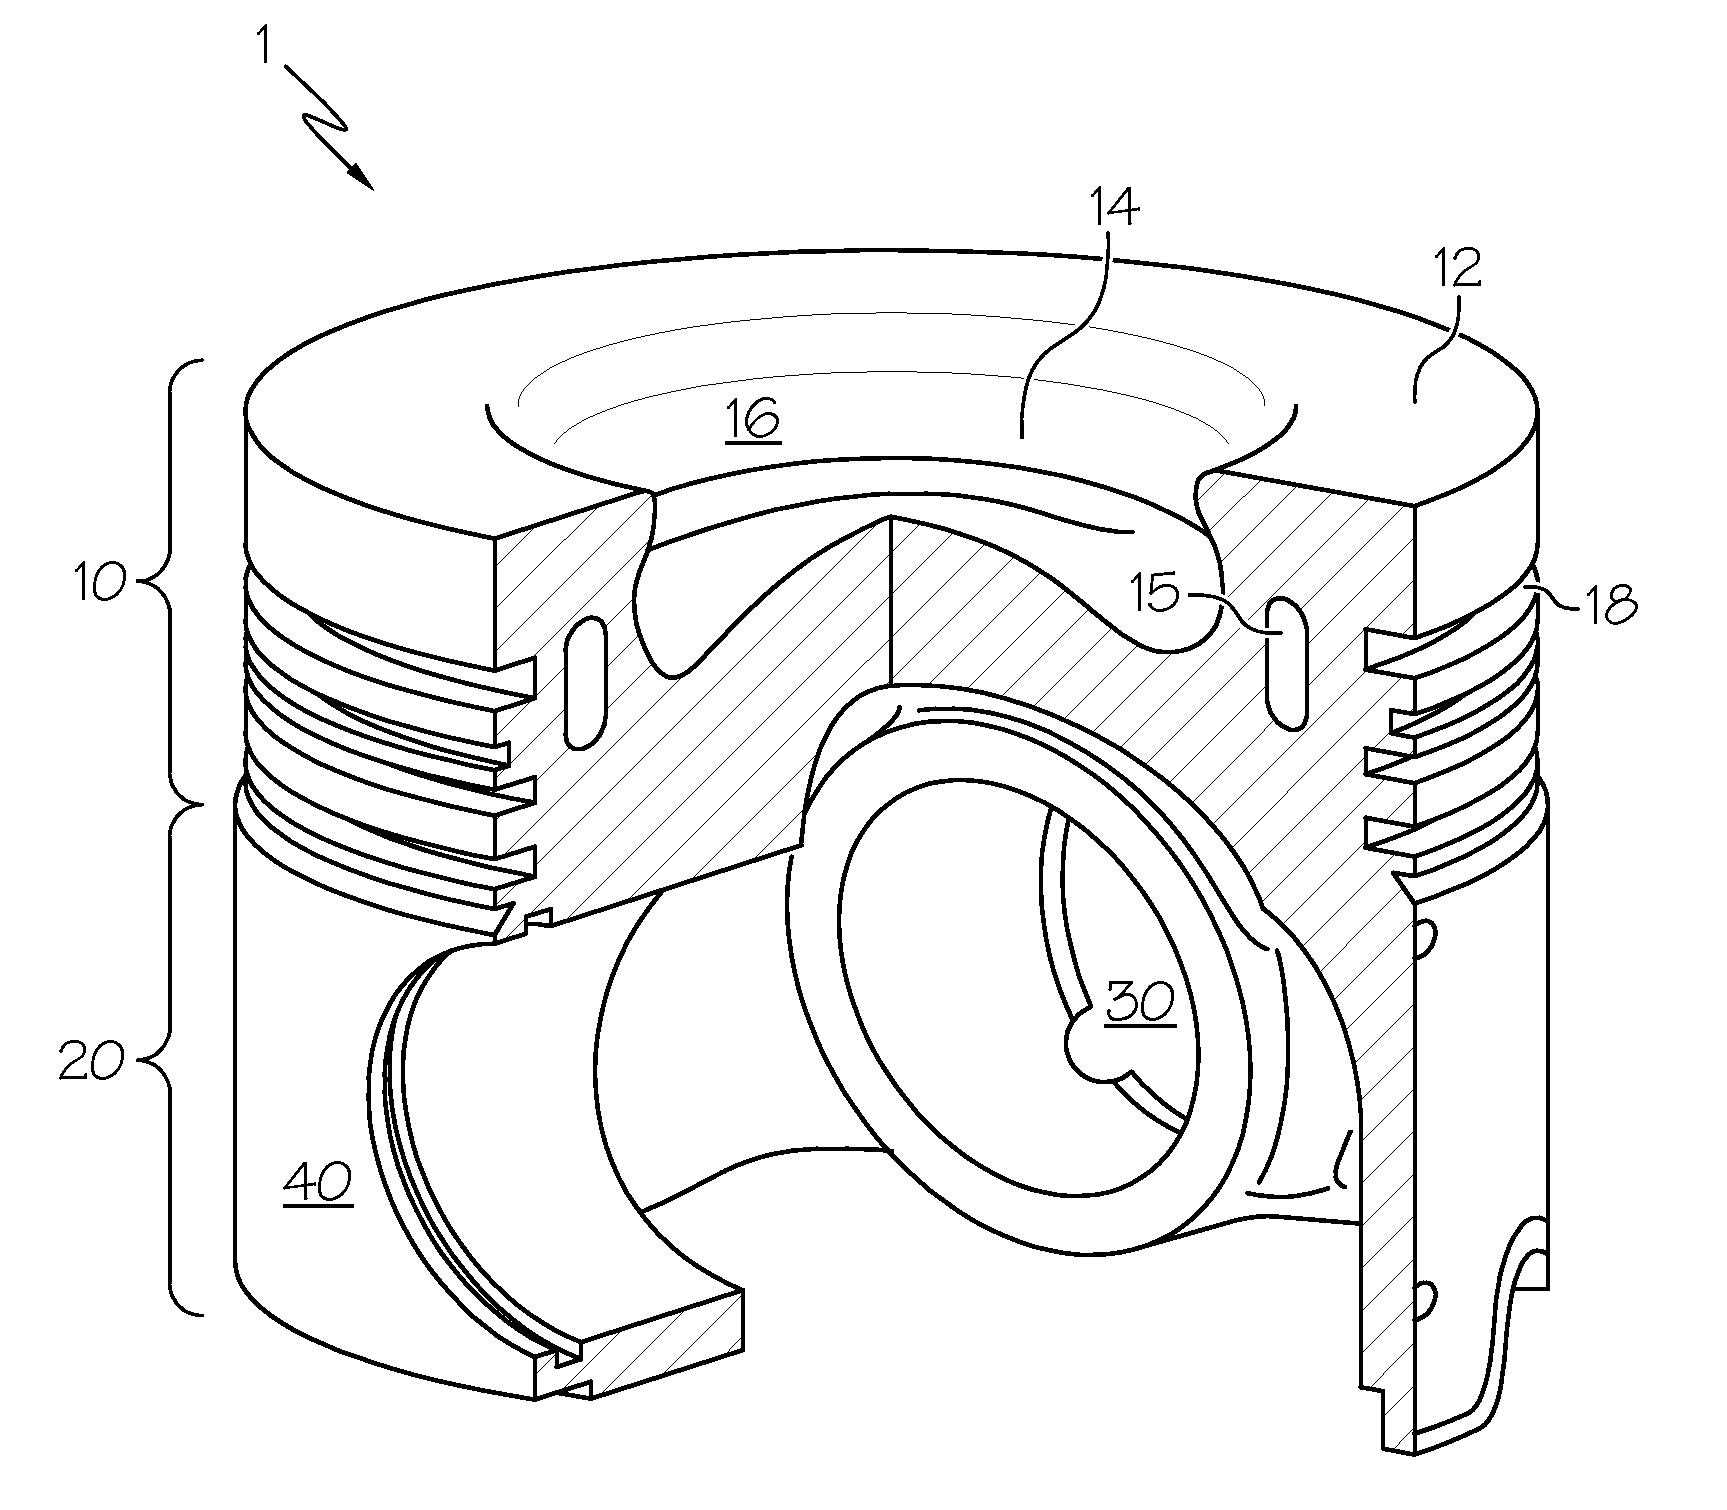 Sand Casting An Aluminum Diesel Piston With An As-Cast, Reentrant Combustion Bowl For Light Or Medium Duty Diesel Engines